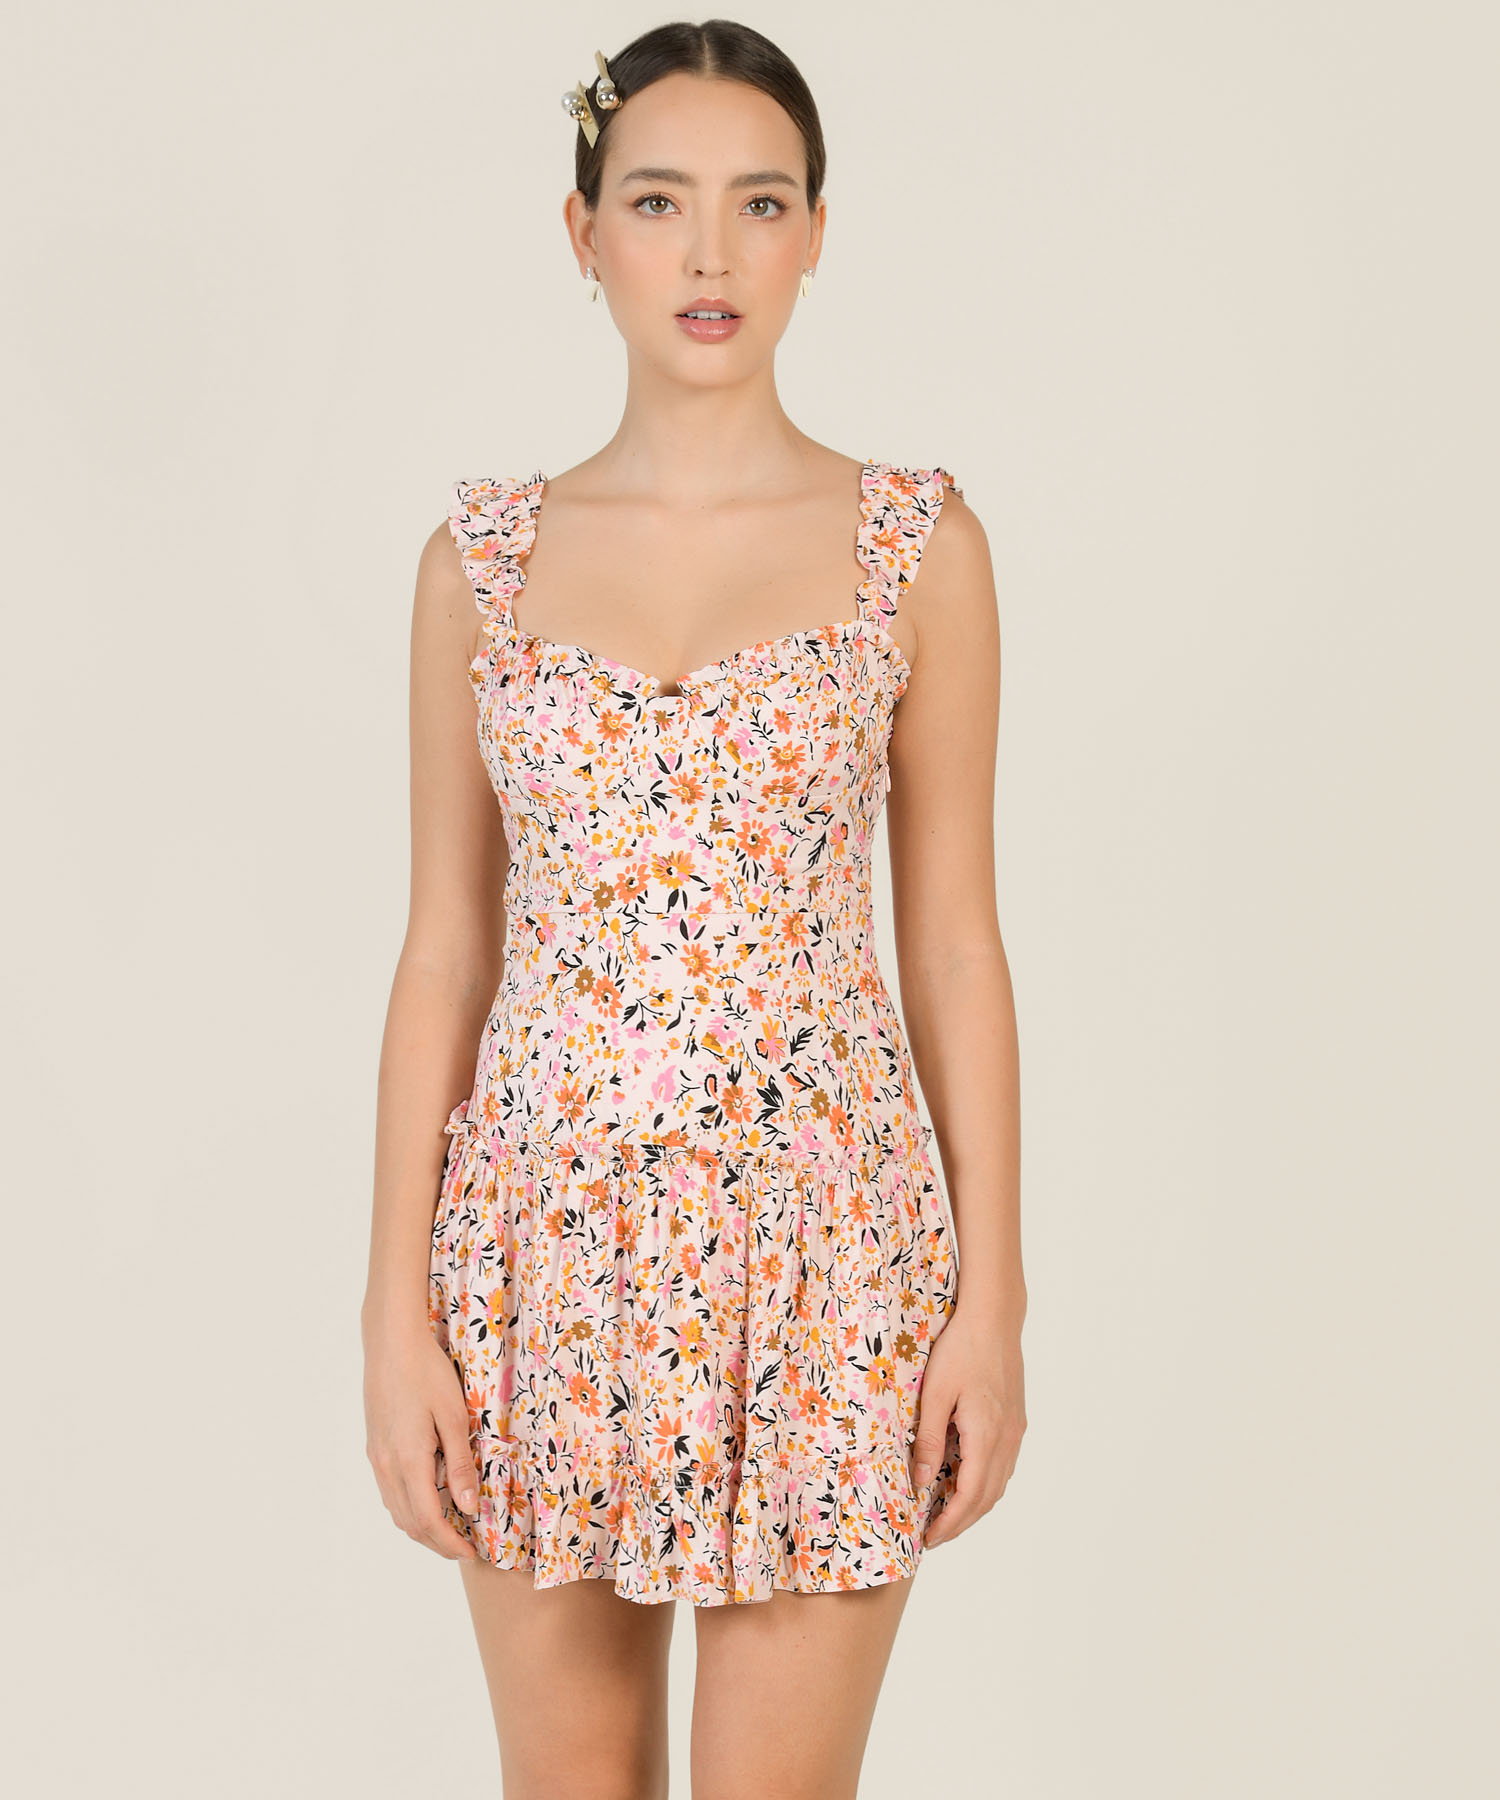 Tulum Floral Bustier Dress in Pink Women's Clothing Online